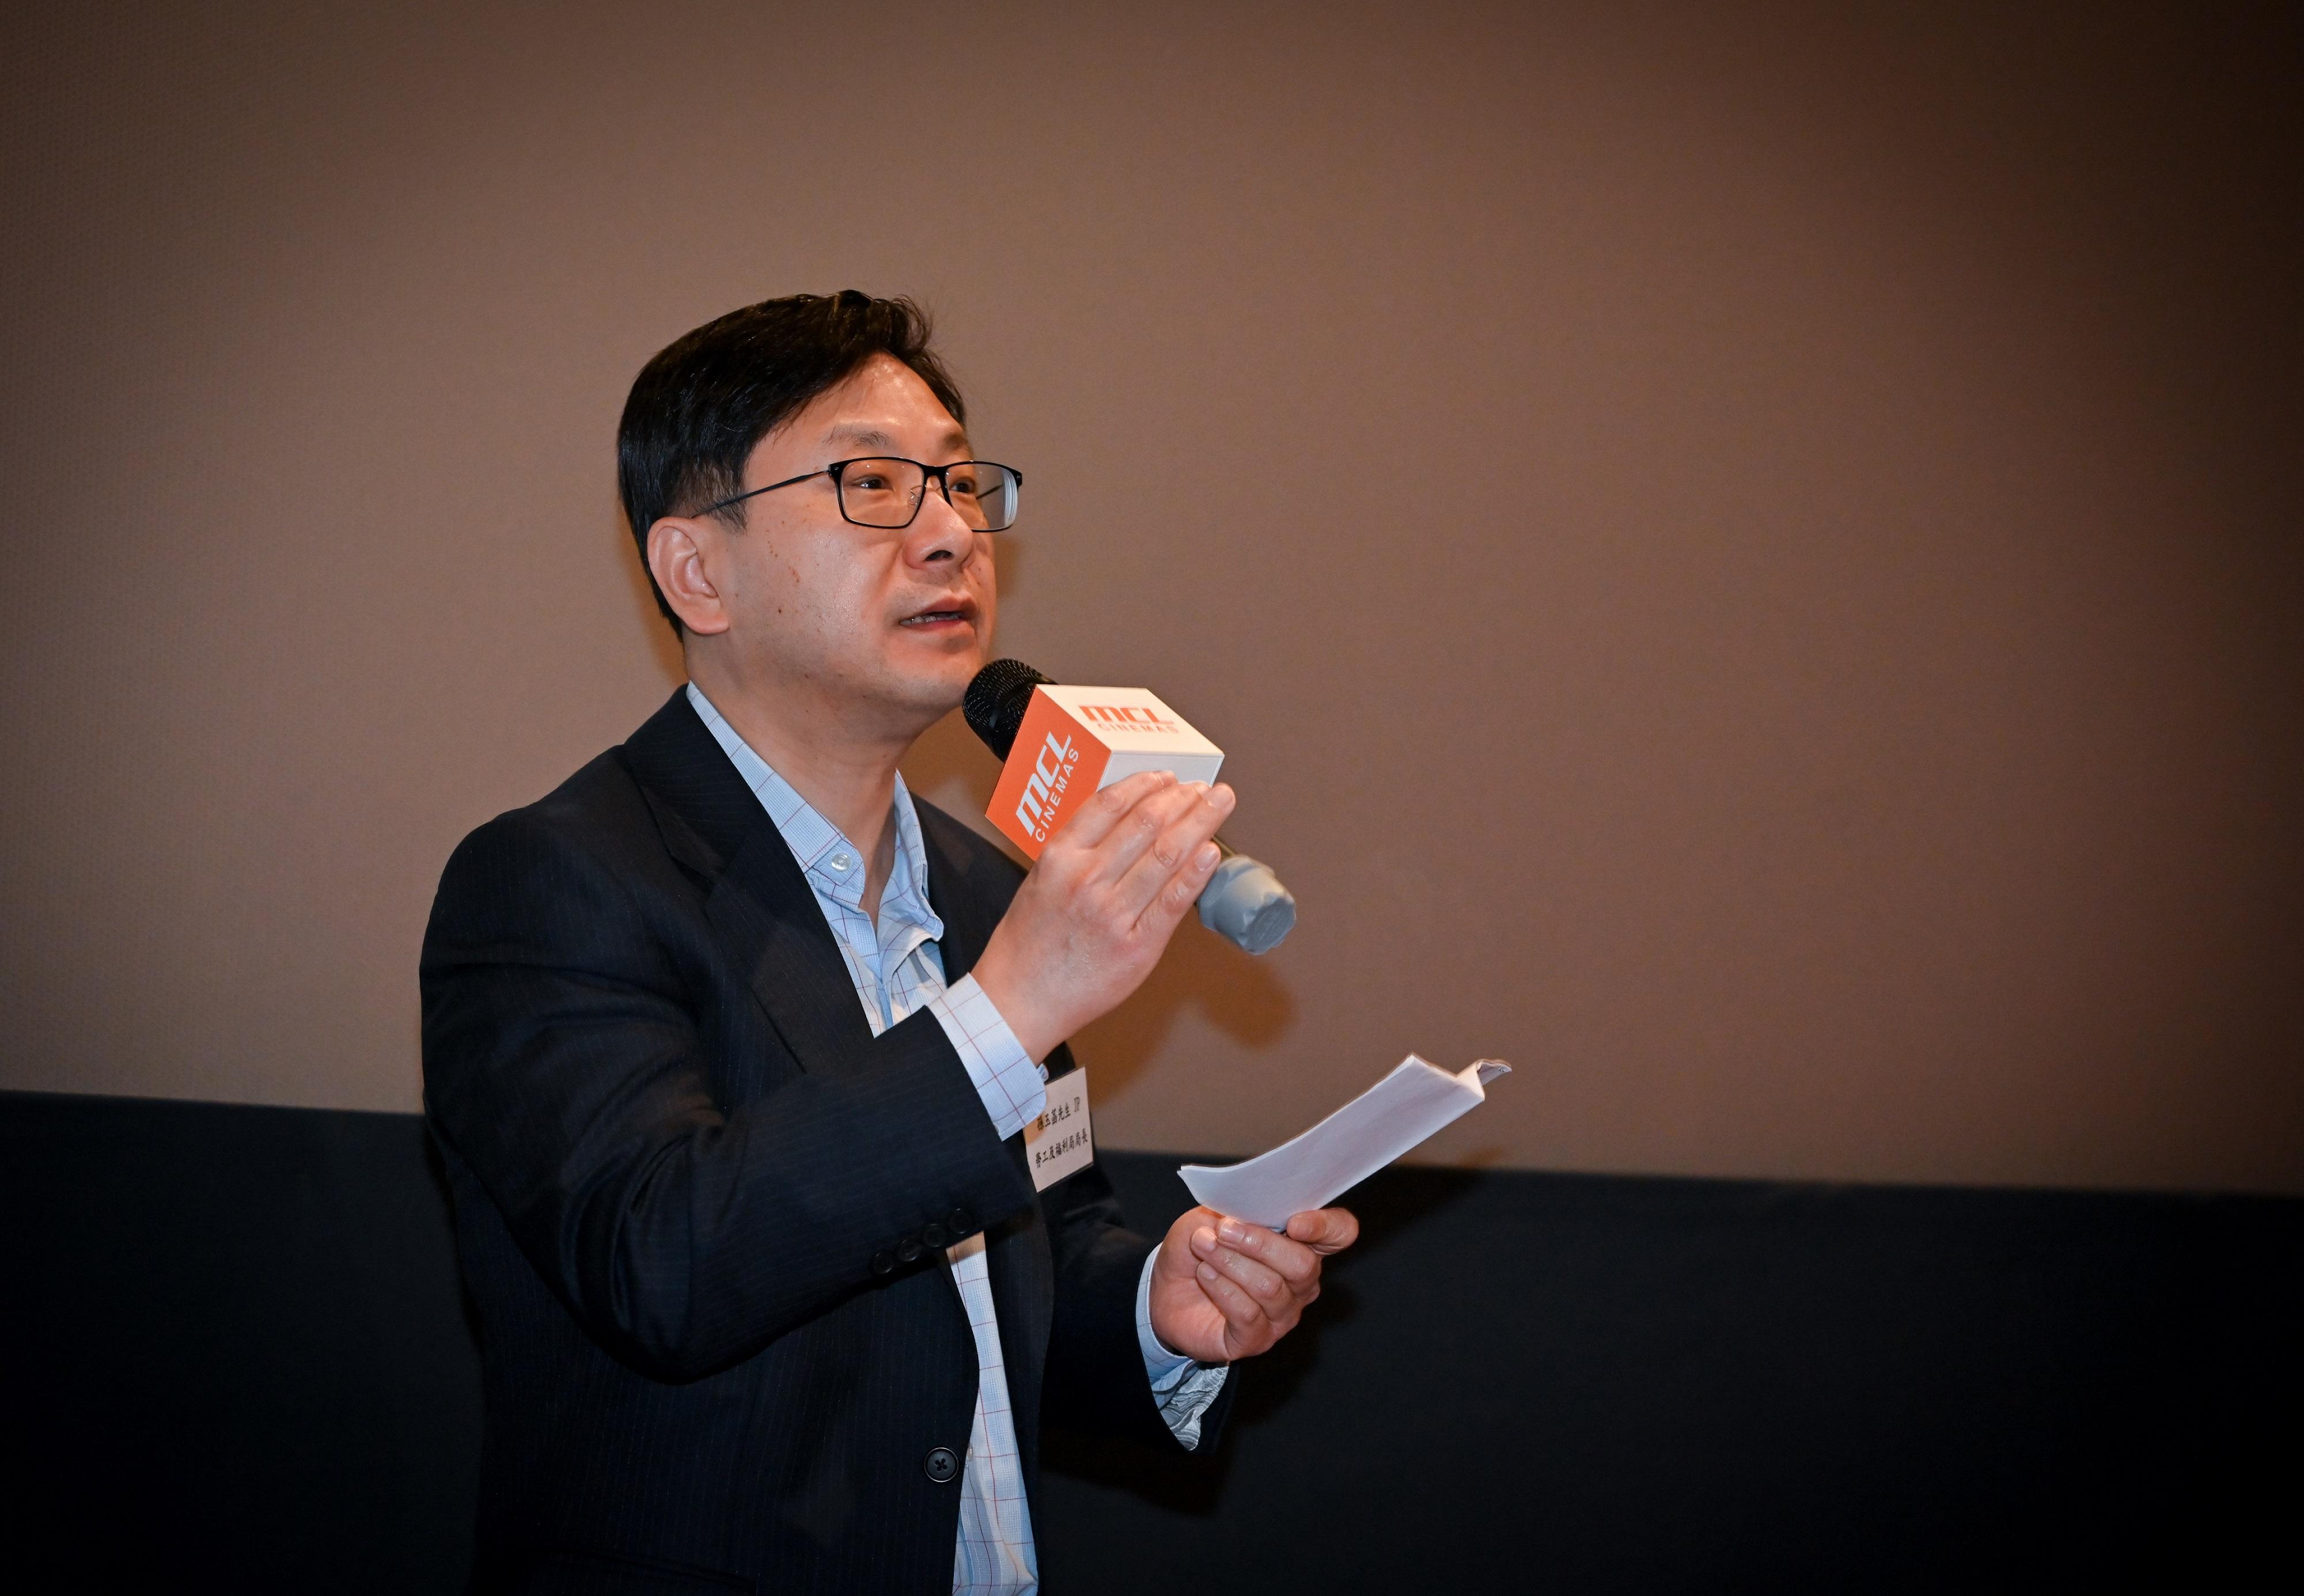 The Secretary for Labour and Welfare, Mr Chris Sun, addressed the audience at a film show hosted by the Social Welfare Department today (April 8). He expressed his appreciation to foster parents for their care and concern for foster children and encouraged people who care for children to join the service.